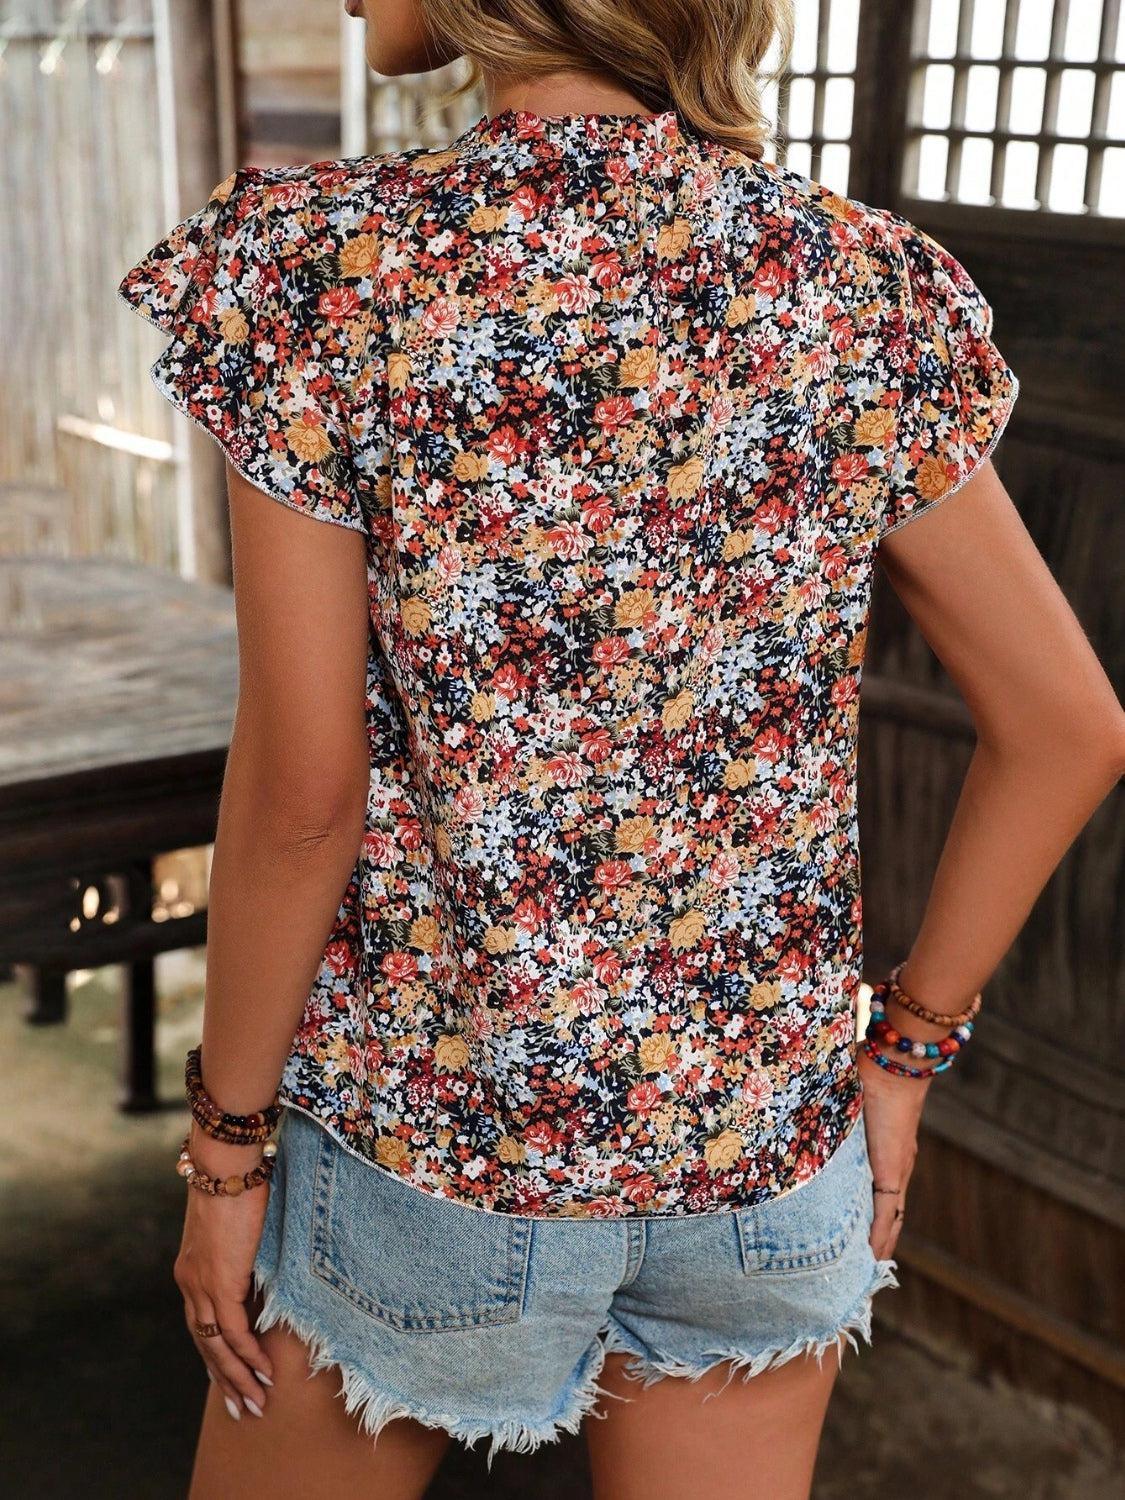 a woman wearing a floral shirt and denim shorts